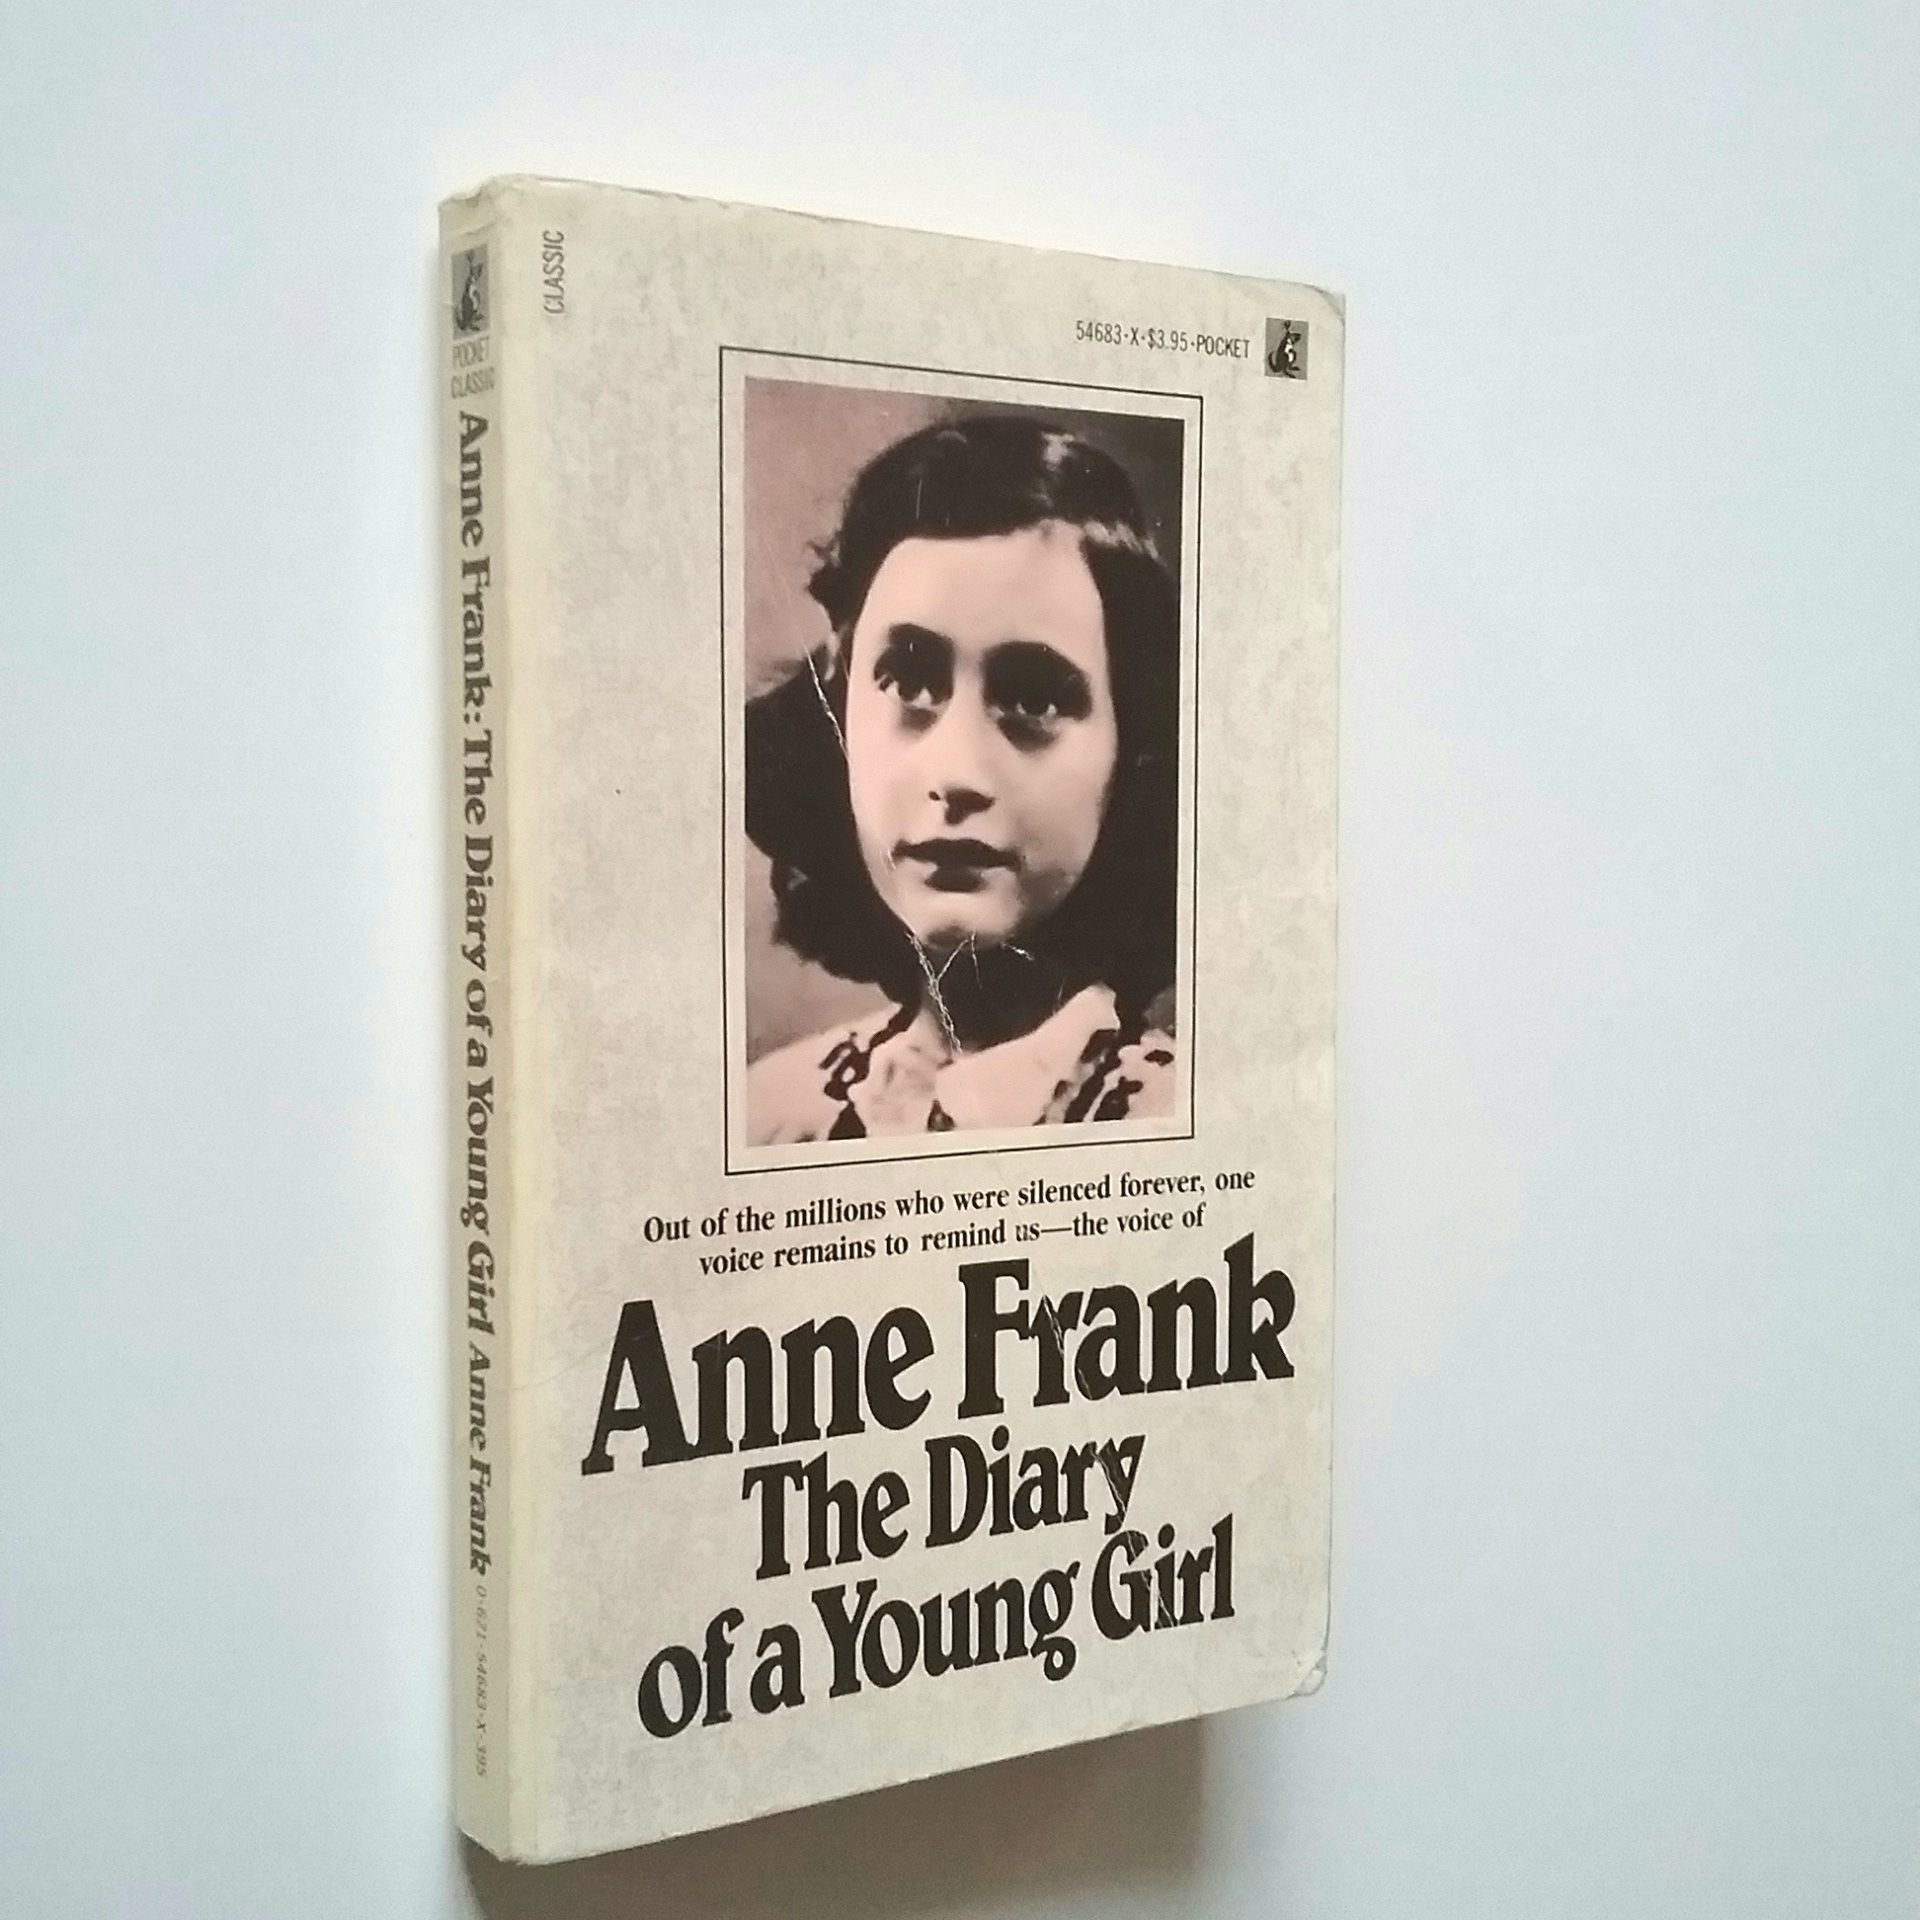 The Diary of a Young Girl - Anne Frank